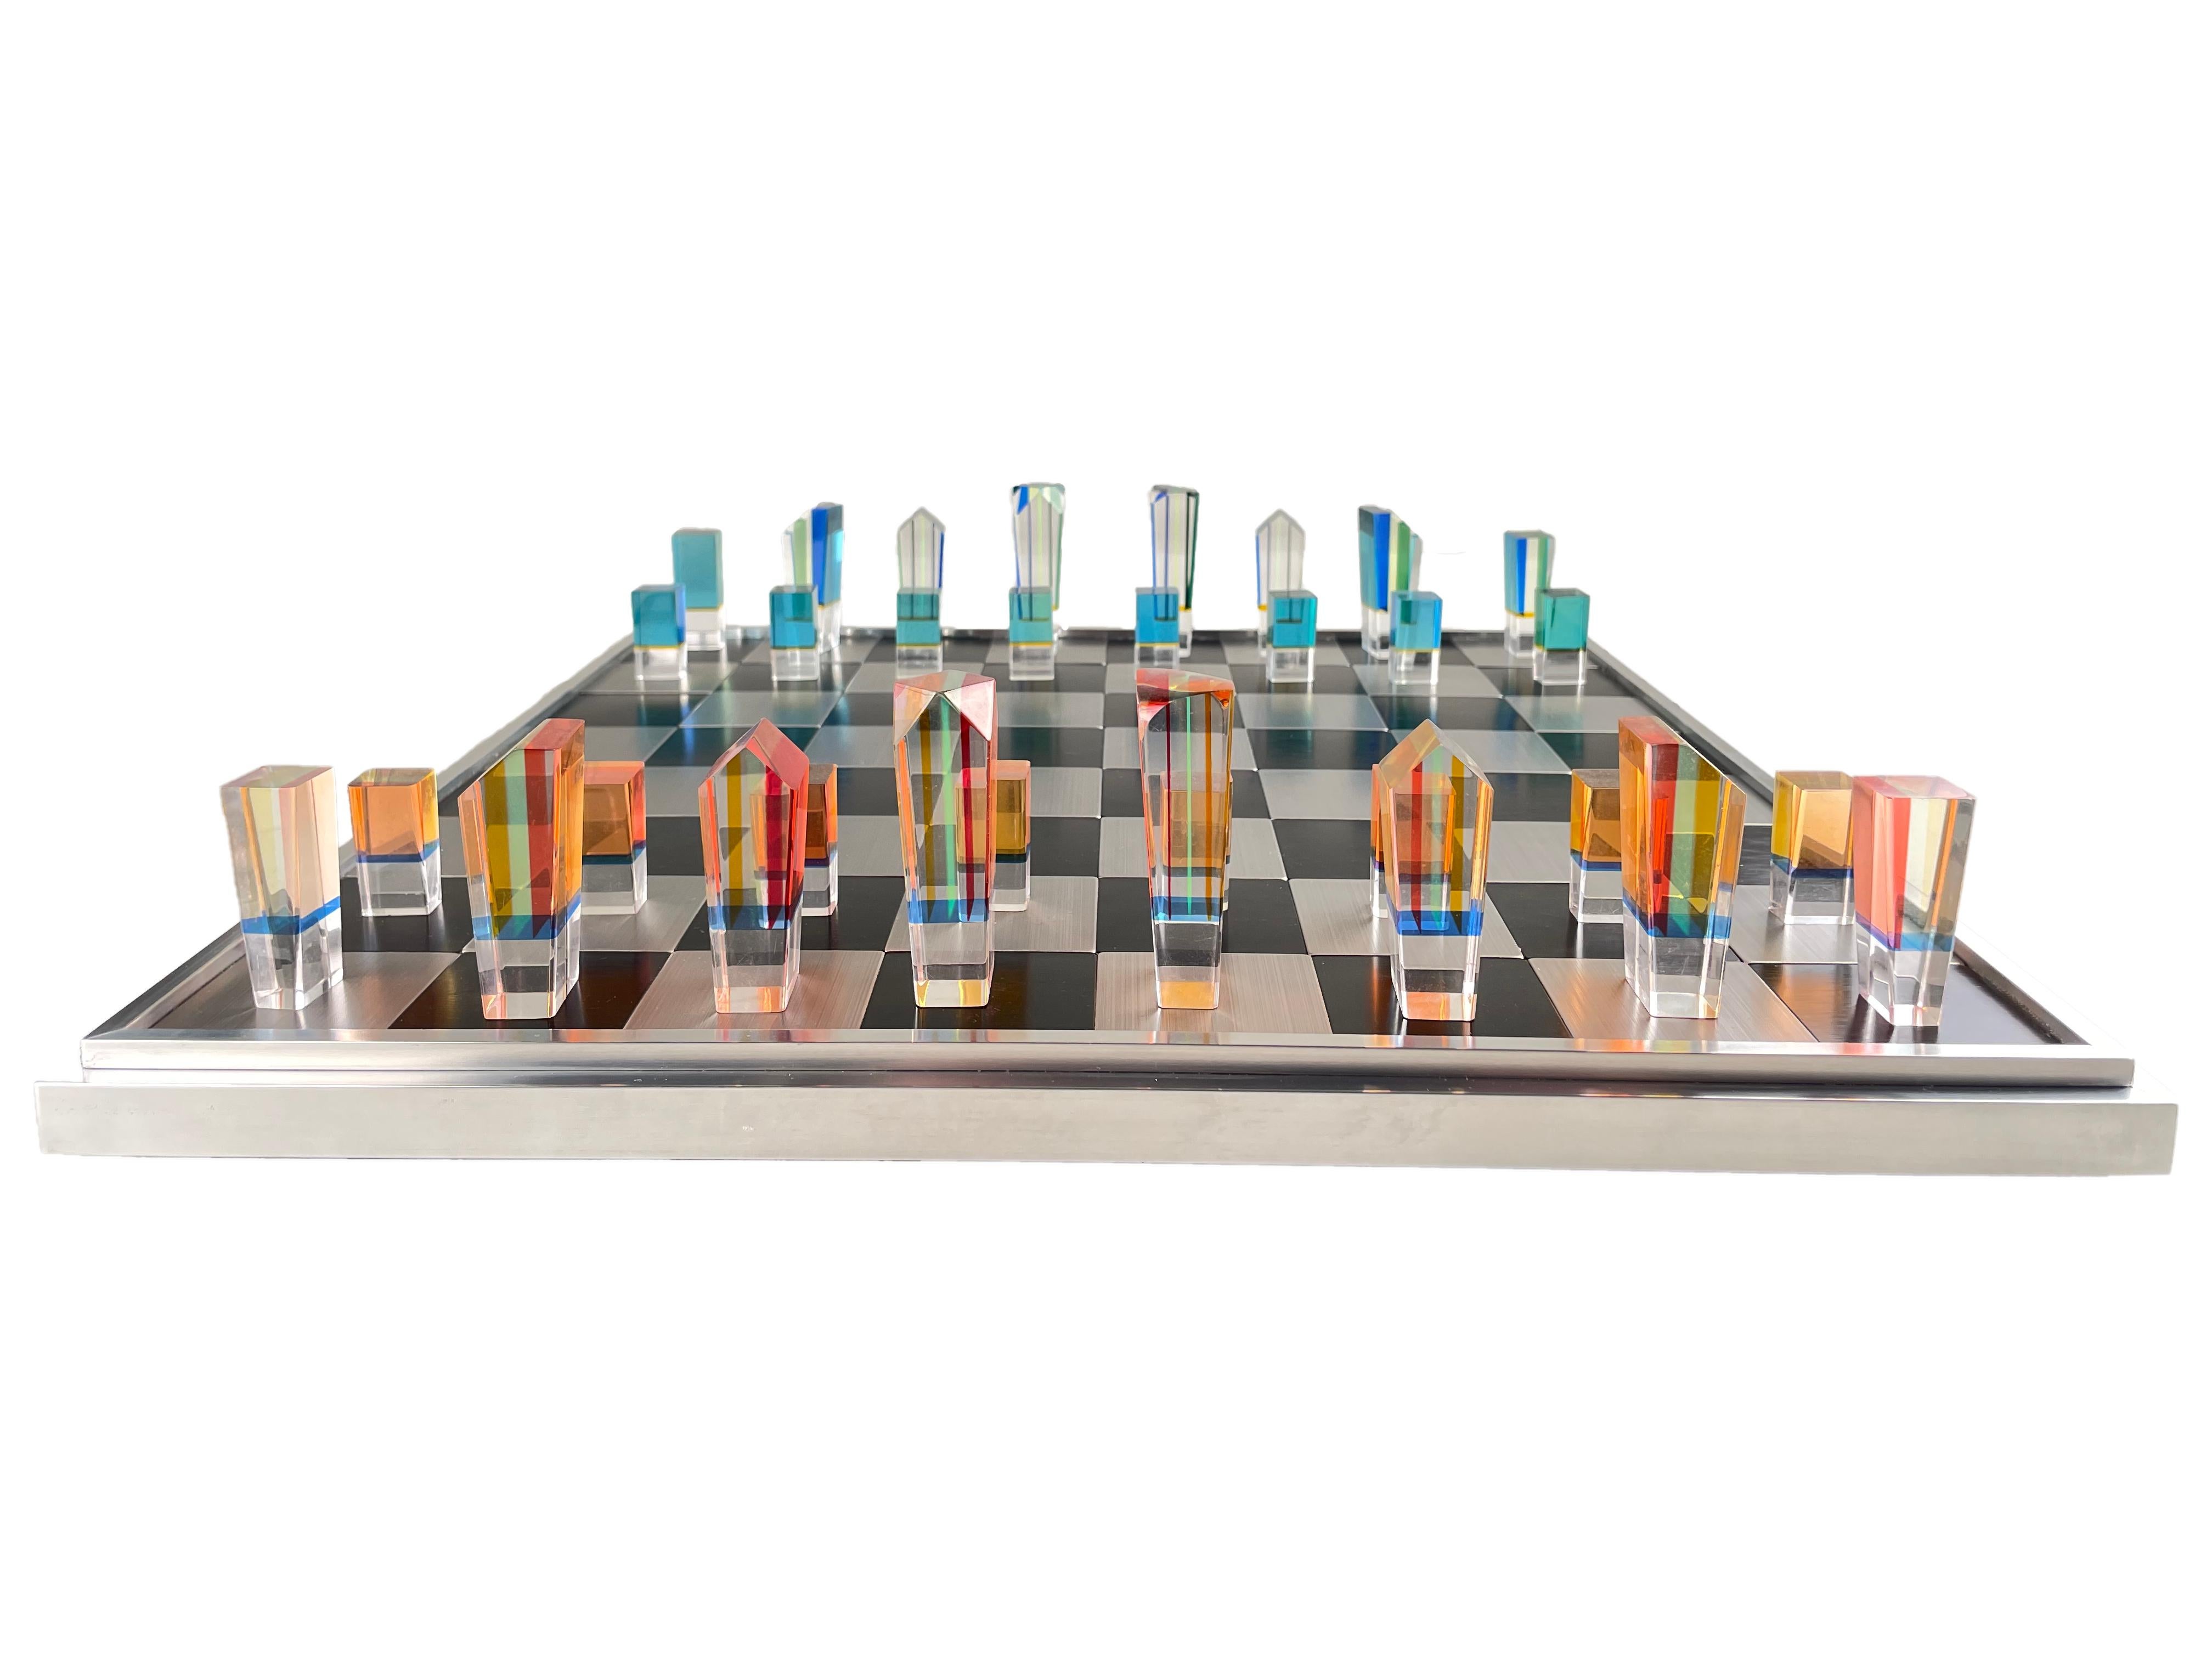 An American Mid-Century Modern acrylic and aluminum chess set by, Charles Hollis Jones with one set of pieces finished in a layered orange, yellow & red acrylic and the other pieces are yellow, blue, & green acrylic pieces together with a